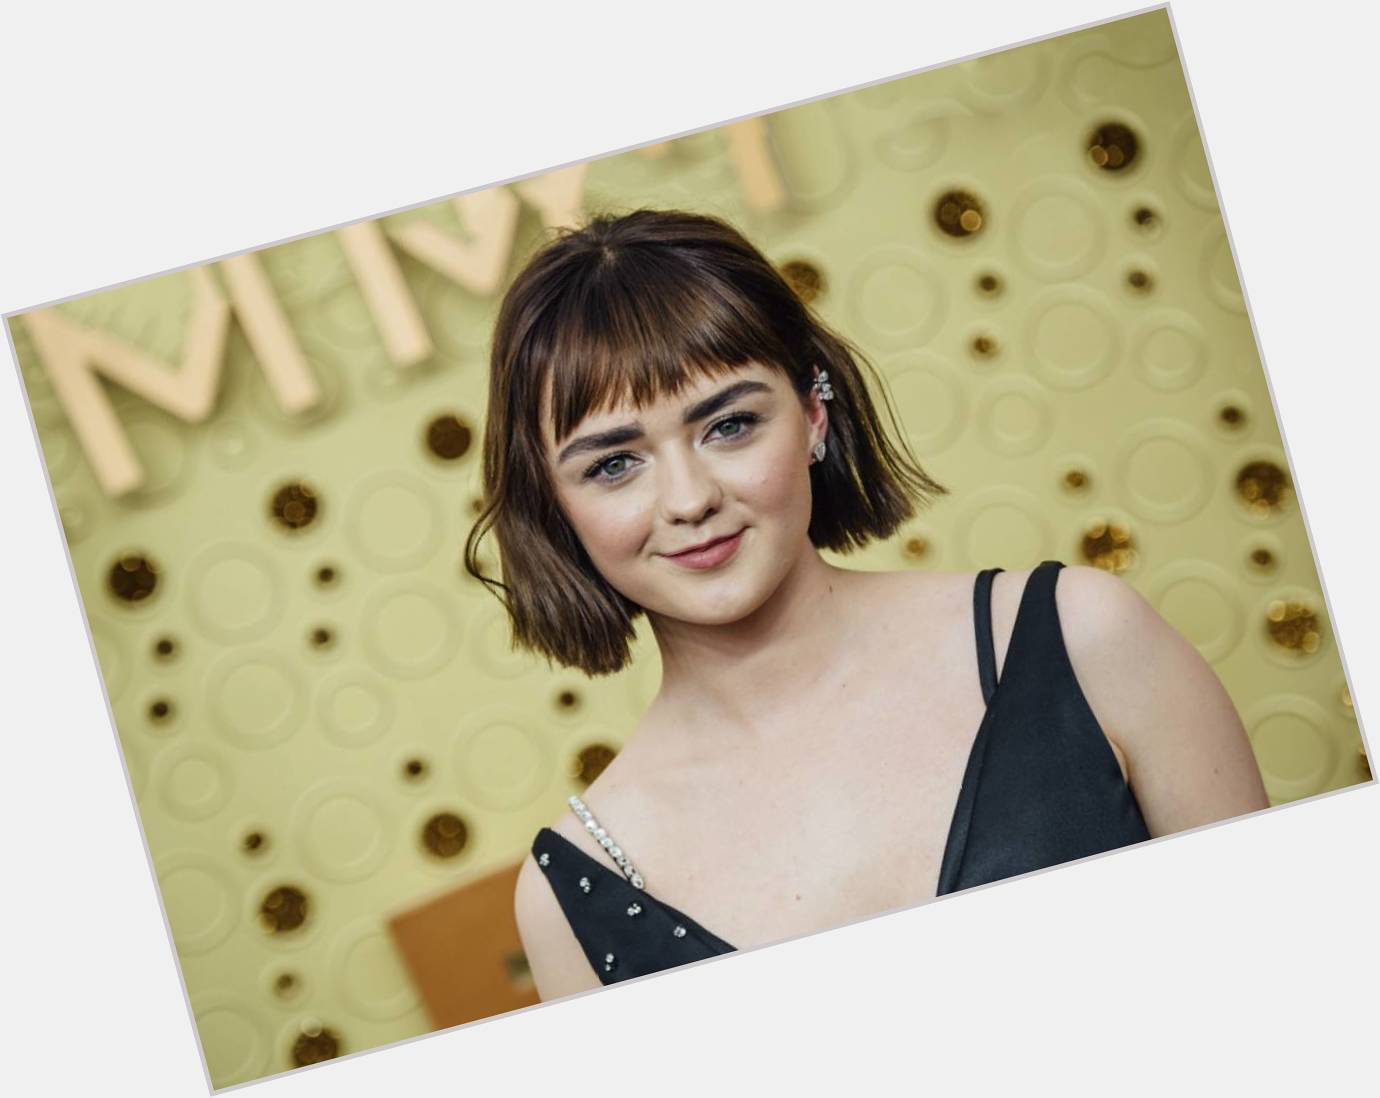 Today our eternal arya stark is completing another your name day, happy birthday maisie williams!  